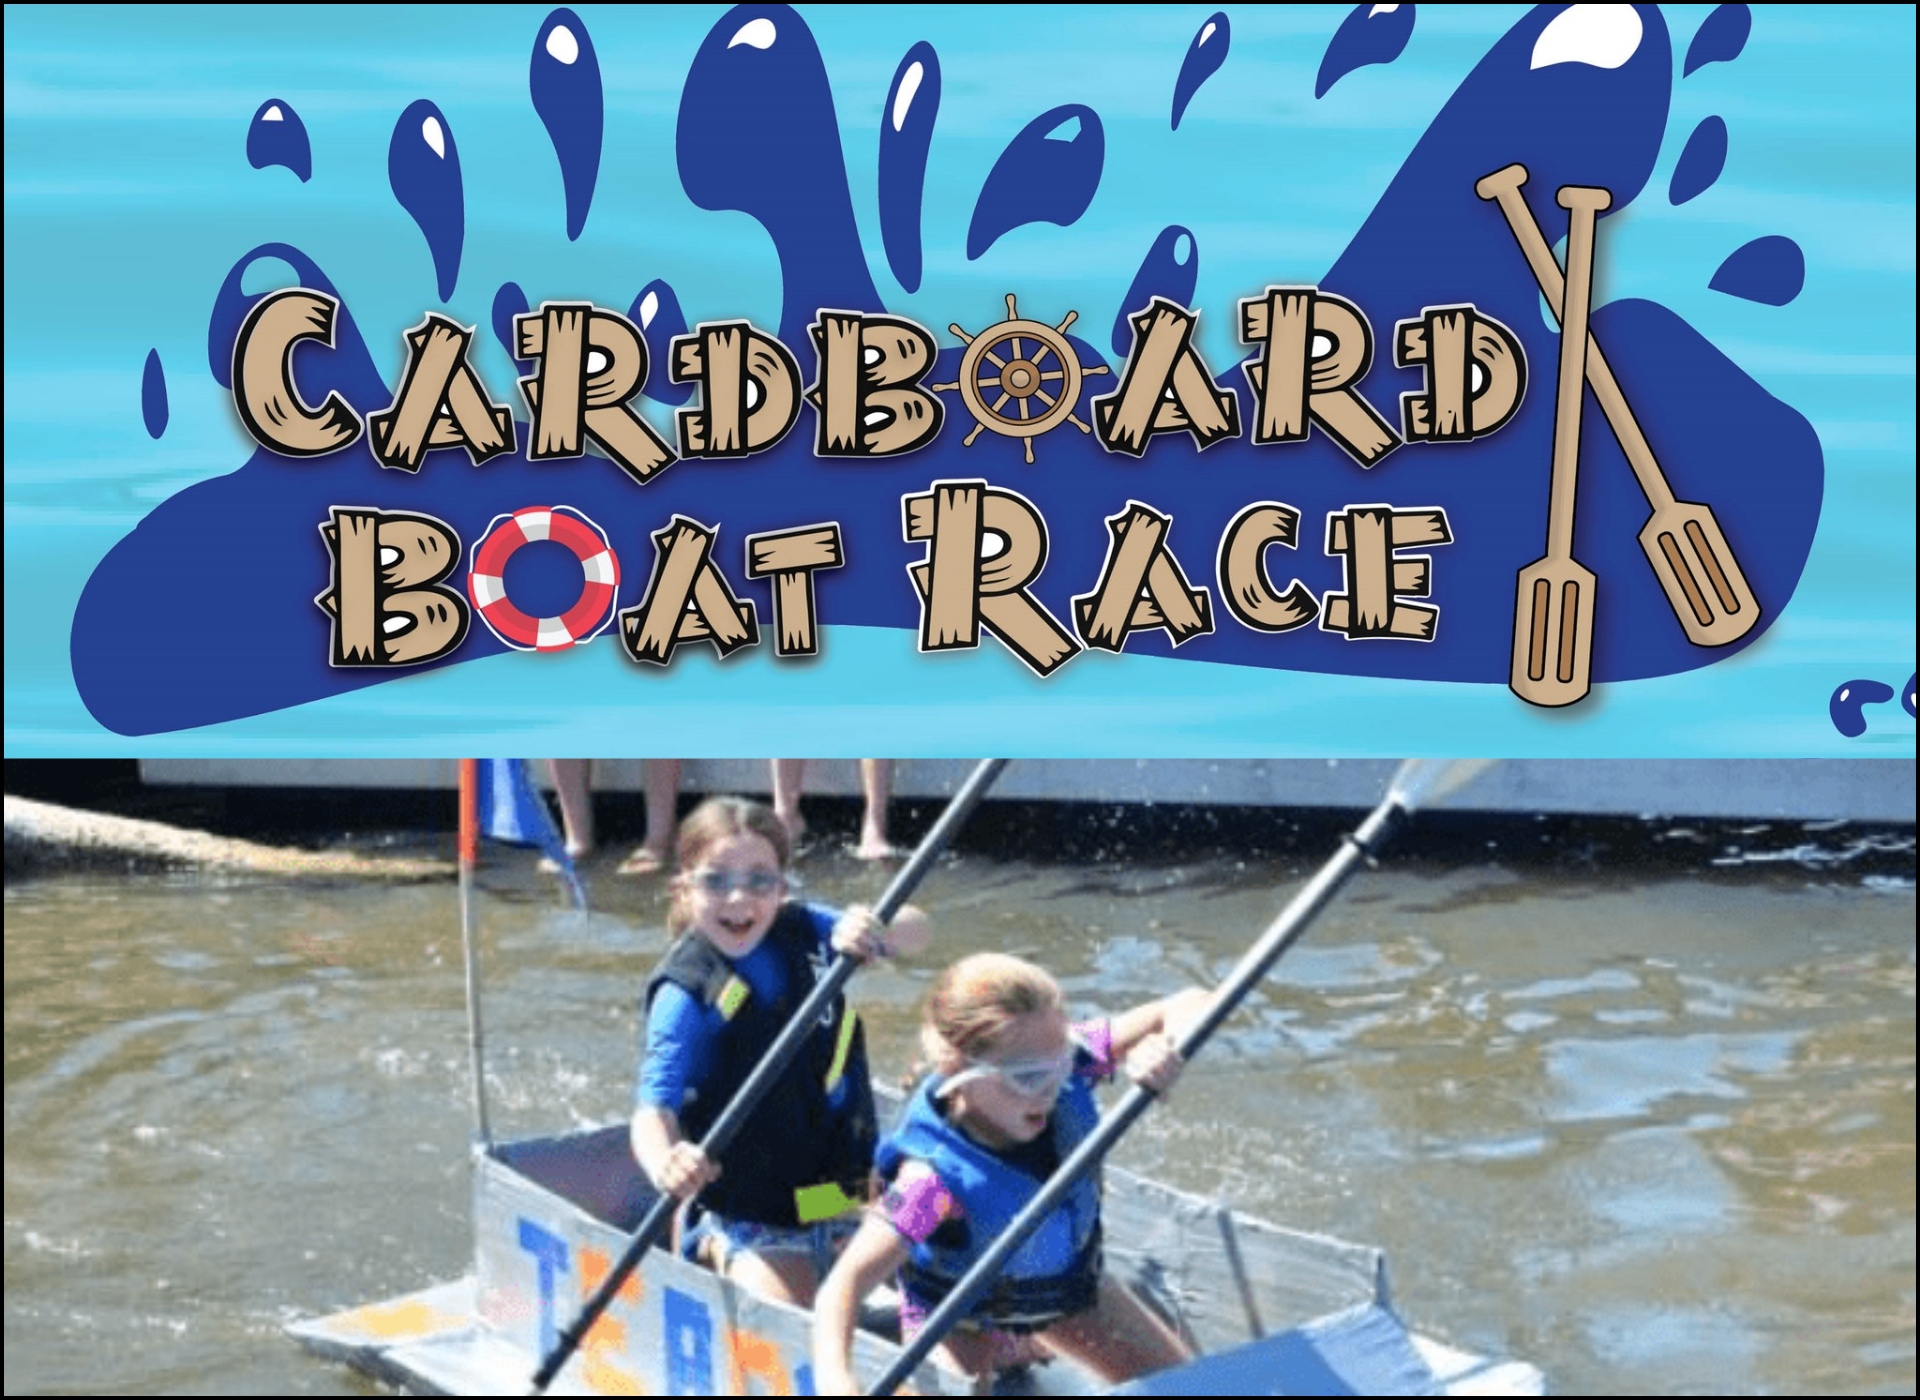 City of Hollywood - Cardboard Boat Race - 3